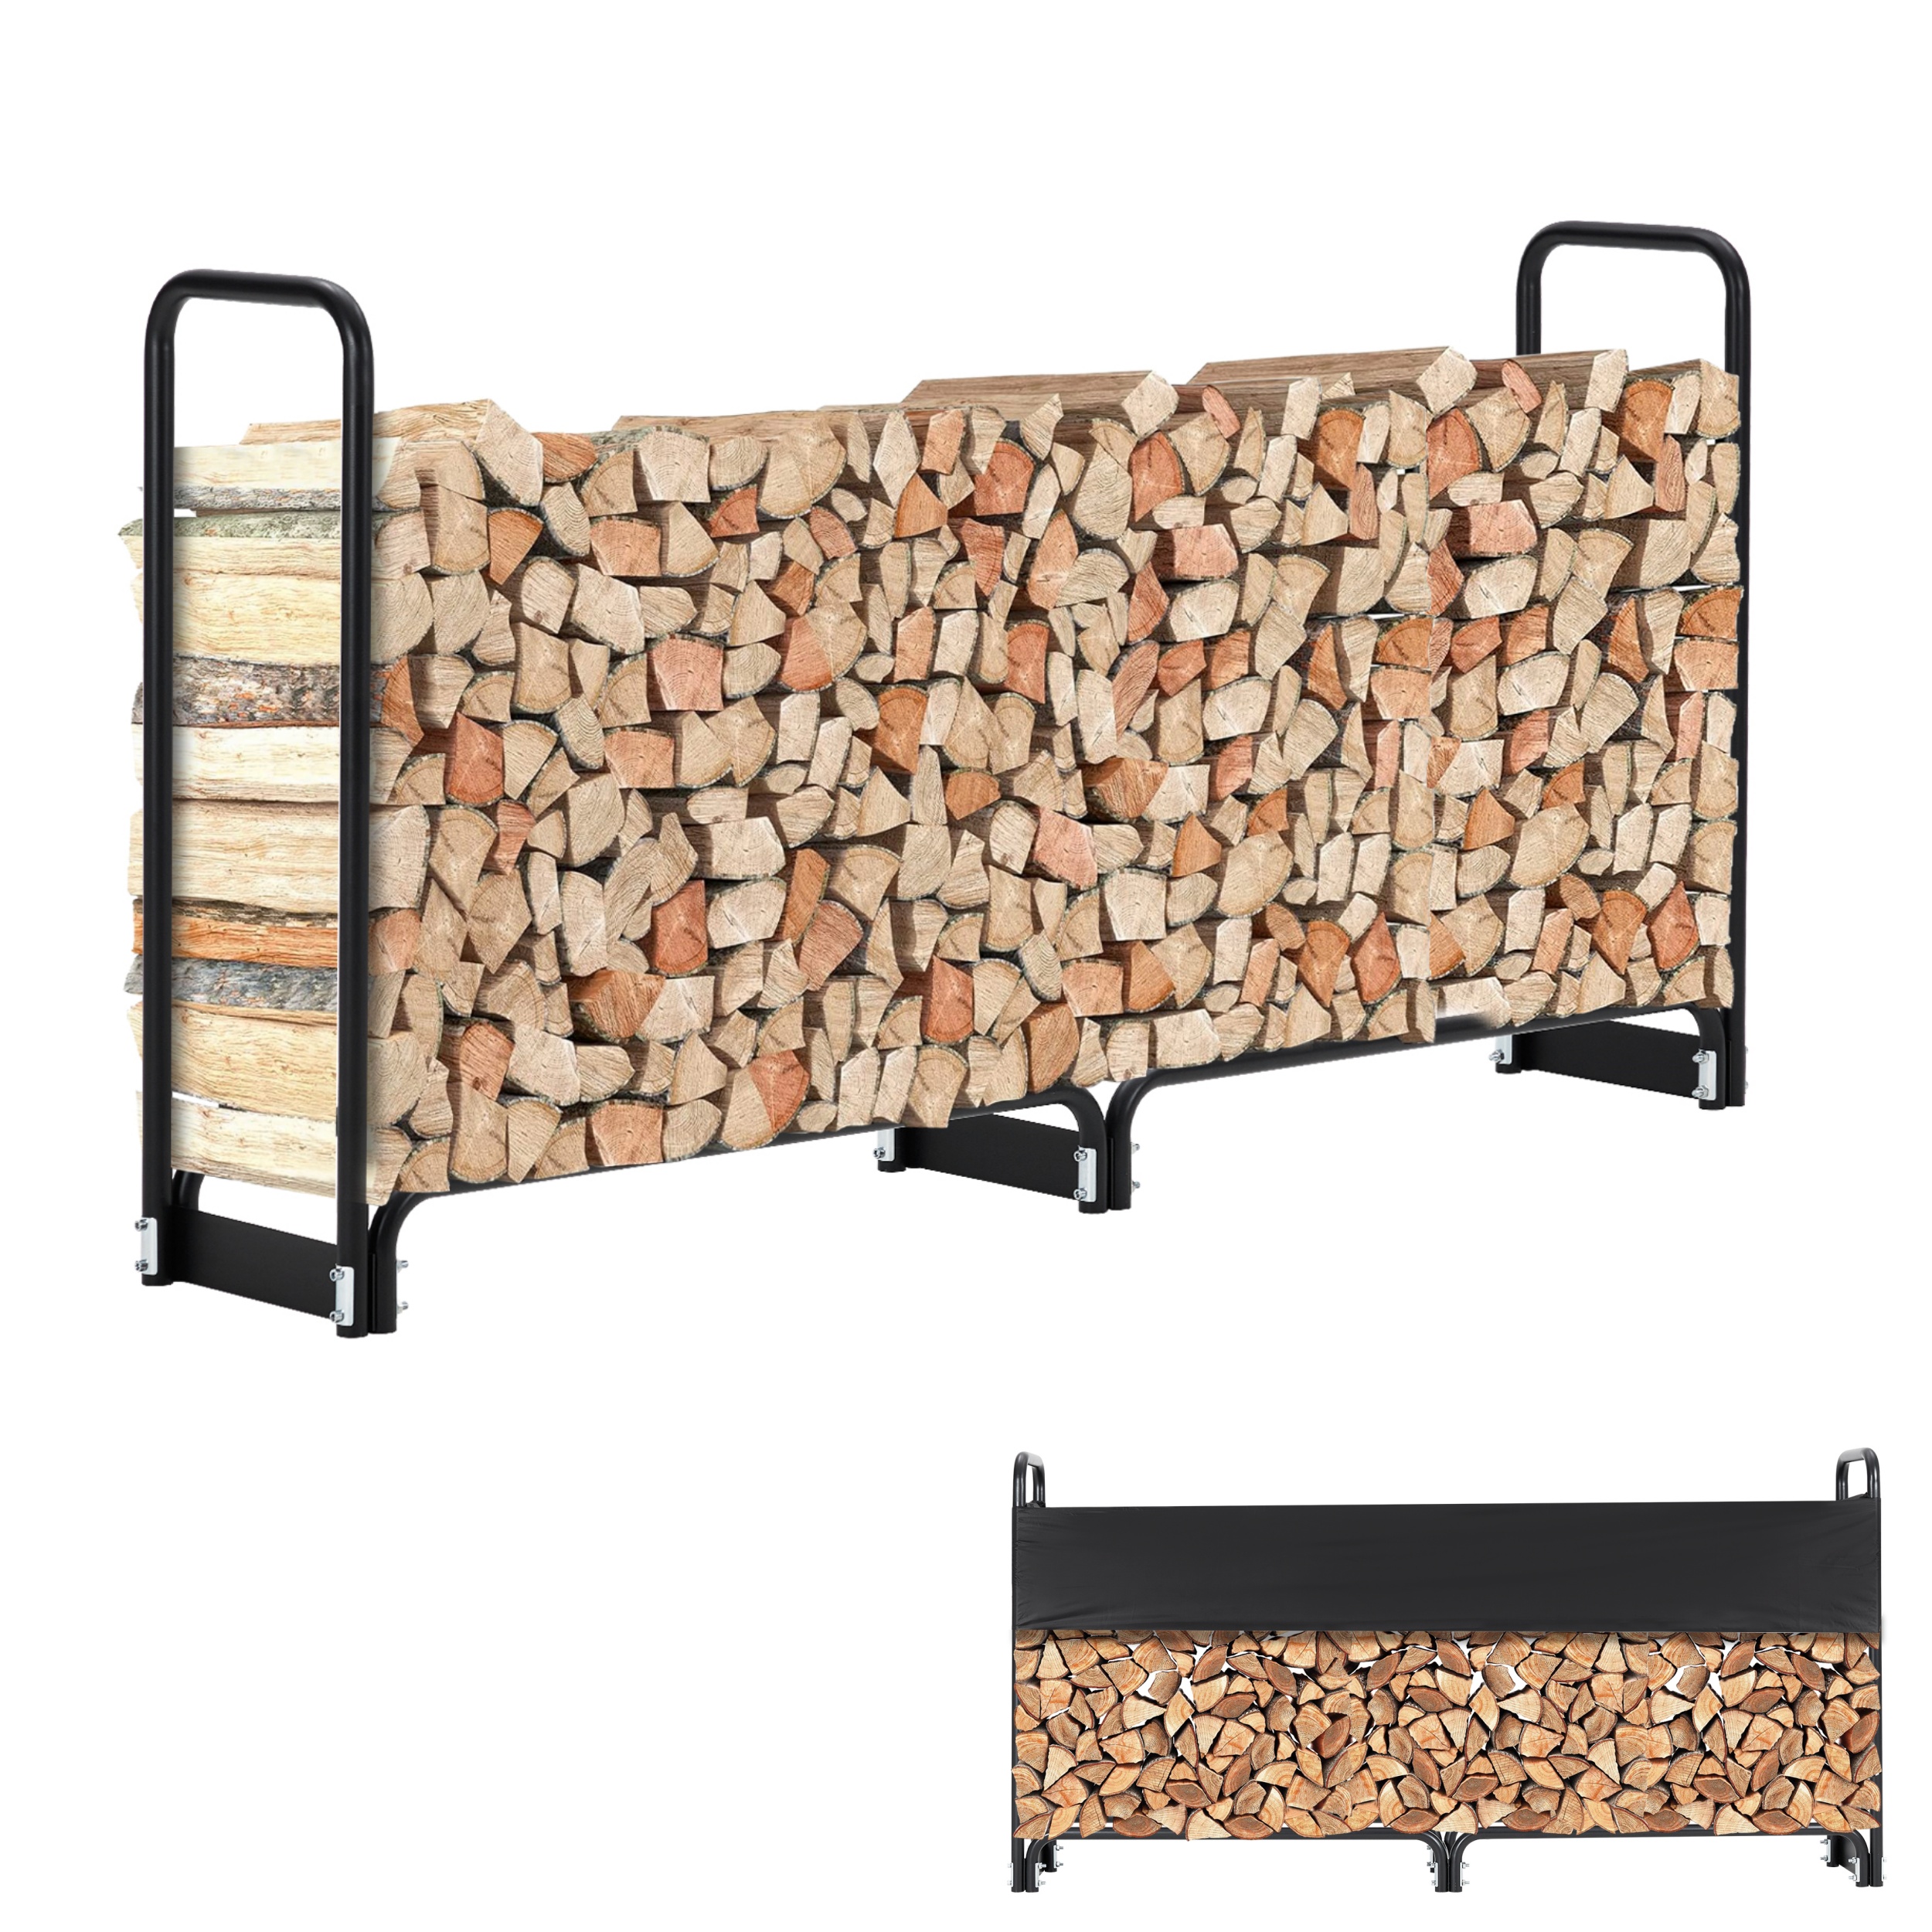 

Firewood Rack Stand Heavy Duty Logs Carrier Holder For Outdoor Indoor Fireplace With Waterproof Cover